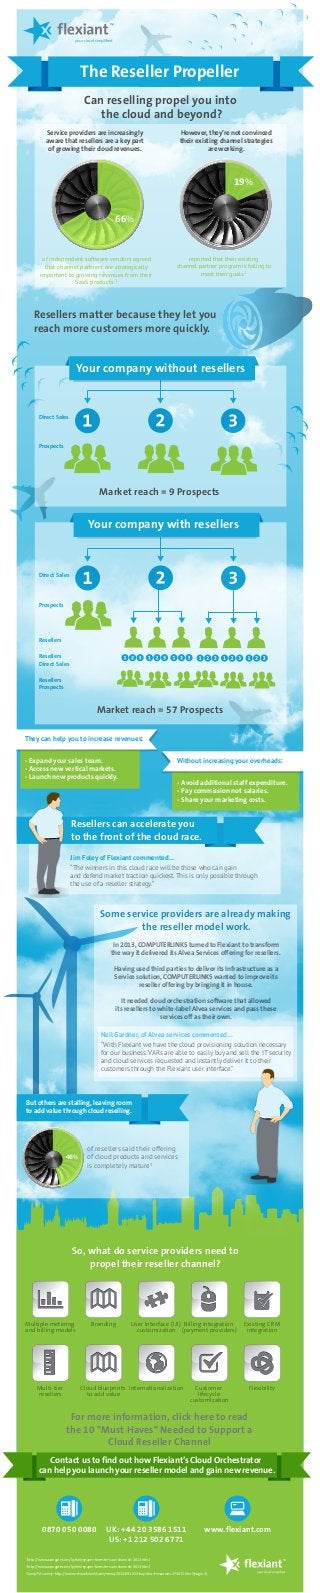 The Reseller Propeller
Can reselling propel you into
the cloud and beyond?
Service providers are increasingly
aware that resellers are a key part
of growing their cloud revenues.

However, they’re not convinced
their existing channel strategies
are working.

19%

66%

of independent software vendors agreed
that channel partners are strategically
important to growing revenues from their
SaaS products.1

reported that their existing
channel partner program is failing to
meet their goals.2

Resellers matter because they let you
reach more customers more quickly.

Your company without resellers

Direct Sales

Prospects

Market reach = 9 Prospects

Your company with resellers

Direct Sales

Prospects

Resellers
Resellers
Direct Sales
Resellers
Prospects

Market reach = 57 Prospects
They can help you to increase revenues:
Without increasing your overheads:

- Expand your sales team.
- Access new vertical markets.
- Launch new products quickly.

- Avoid additional staff expenditure.
- Pay commission not salaries.
- Share your marketing costs.

Resellers can accelerate you
to the front of the cloud race.
Jim Foley of Flexiant commented…
“The winners in this cloud race will be those who can gain
and defend market traction quickest. This is only possible through
the use of a reseller strategy.”

Some service providers are already making
the reseller model work.
In 2013, COMPUTERLINKS turned to Flexiant to transform
the way it delivered its Alvea Services offering for resellers.
Having used third parties to deliver its Infrastructure as a
Service solution, COMPUTERLINKS wanted to improve its
reseller offering by bringing it in house.
It needed cloud orchestration software that allowed
its resellers to white-label Alvea services and pass these
services off as their own.

Neil Gardner, of Alvea services commented…
“With Flexiant we have the cloud provisioning solution necessary
for our business. VARs are able to easily buy and sell the IT security
and cloud services requested and instantly deliver it to their
customers through the Flexiant user interface.”

But others are stalling, leaving room
to add value through cloud reselling.

46%

of resellers said their offering
of cloud products and services
is completely mature3

So, what do service providers need to
propel their reseller channel?

Multiple metering
and billing models

Multi-tier
resellers

Branding

User Interface (UI) Billing integration
customization (payment providers)

Cloud blueprints Internationalization
to add value

Customer
lifecycle
customization

Existing CRM
integration

Flexibility

For more information, click here to read
the 10 "Must Haves" Needed to Support a
Cloud Reseller Channel
Contact us to find out how Flexiant’s Cloud Orchestrator
can help you launch your reseller model and gain new revenue.

0870 050 0080

UK: +44 20 3586 1511
US: +1 212 502 6771

www.flexiant.com

1

http://www.avangate.com/lp/whitepaper-forrester-saas-channels-2013.html

2

http://www.avangate.com/lp/whitepaper-forrester-saas-channels-2013.html

3

CompTIA survey- http://www.networkworld.com/news/2013/091013-buy-cloud-resources-273672.html?page=1)

 